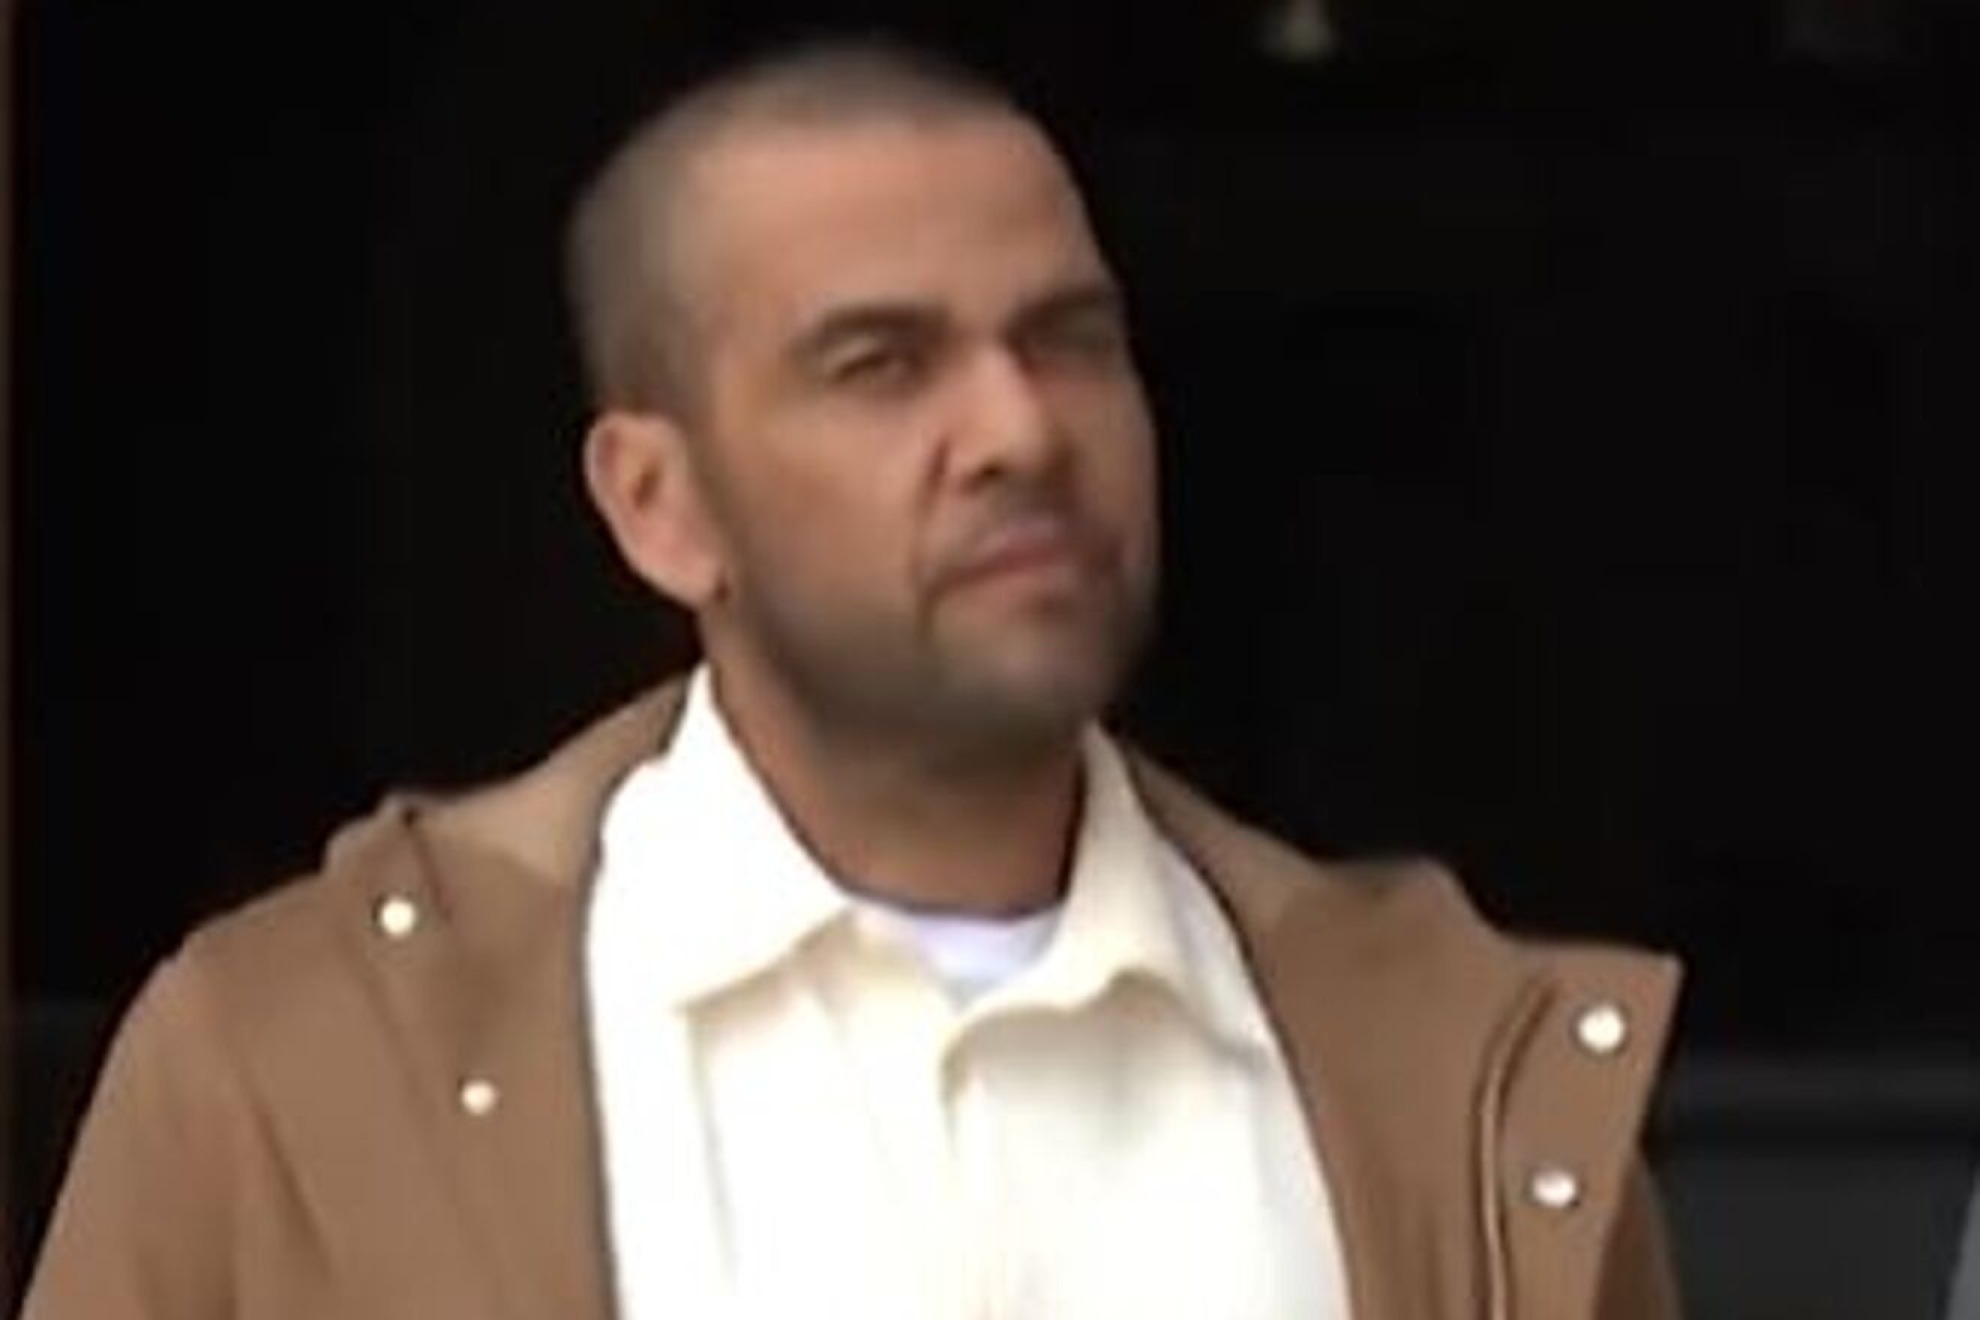 Dani Alves attends his first court appearance after being released on bail; receives insults